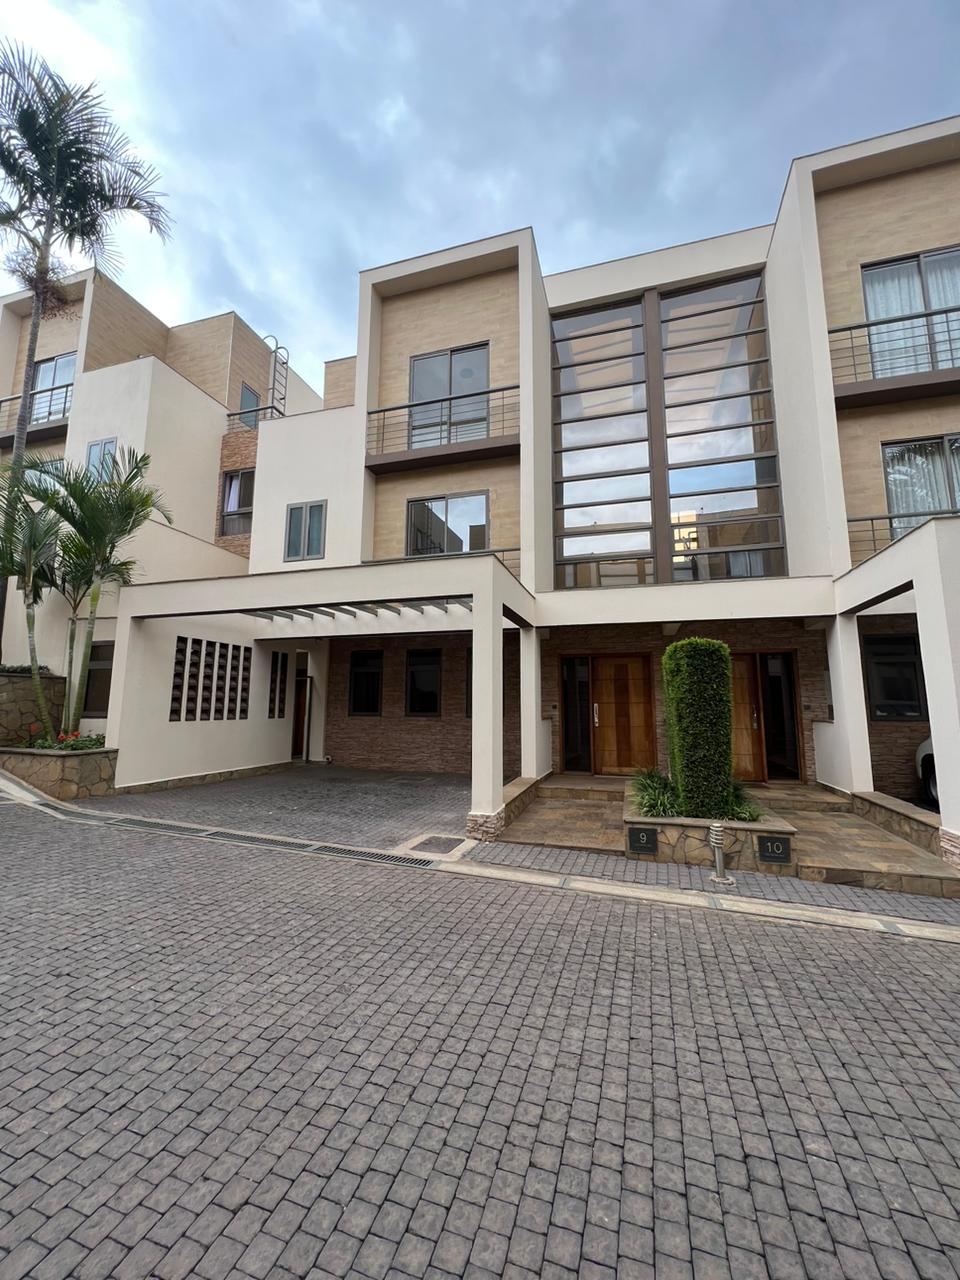 Spacious modern newly built 4 bedroom plus dsq townhouse to let in Kileleshwa, Nairobi. Rent per month usd 2,500 Musilli Homes